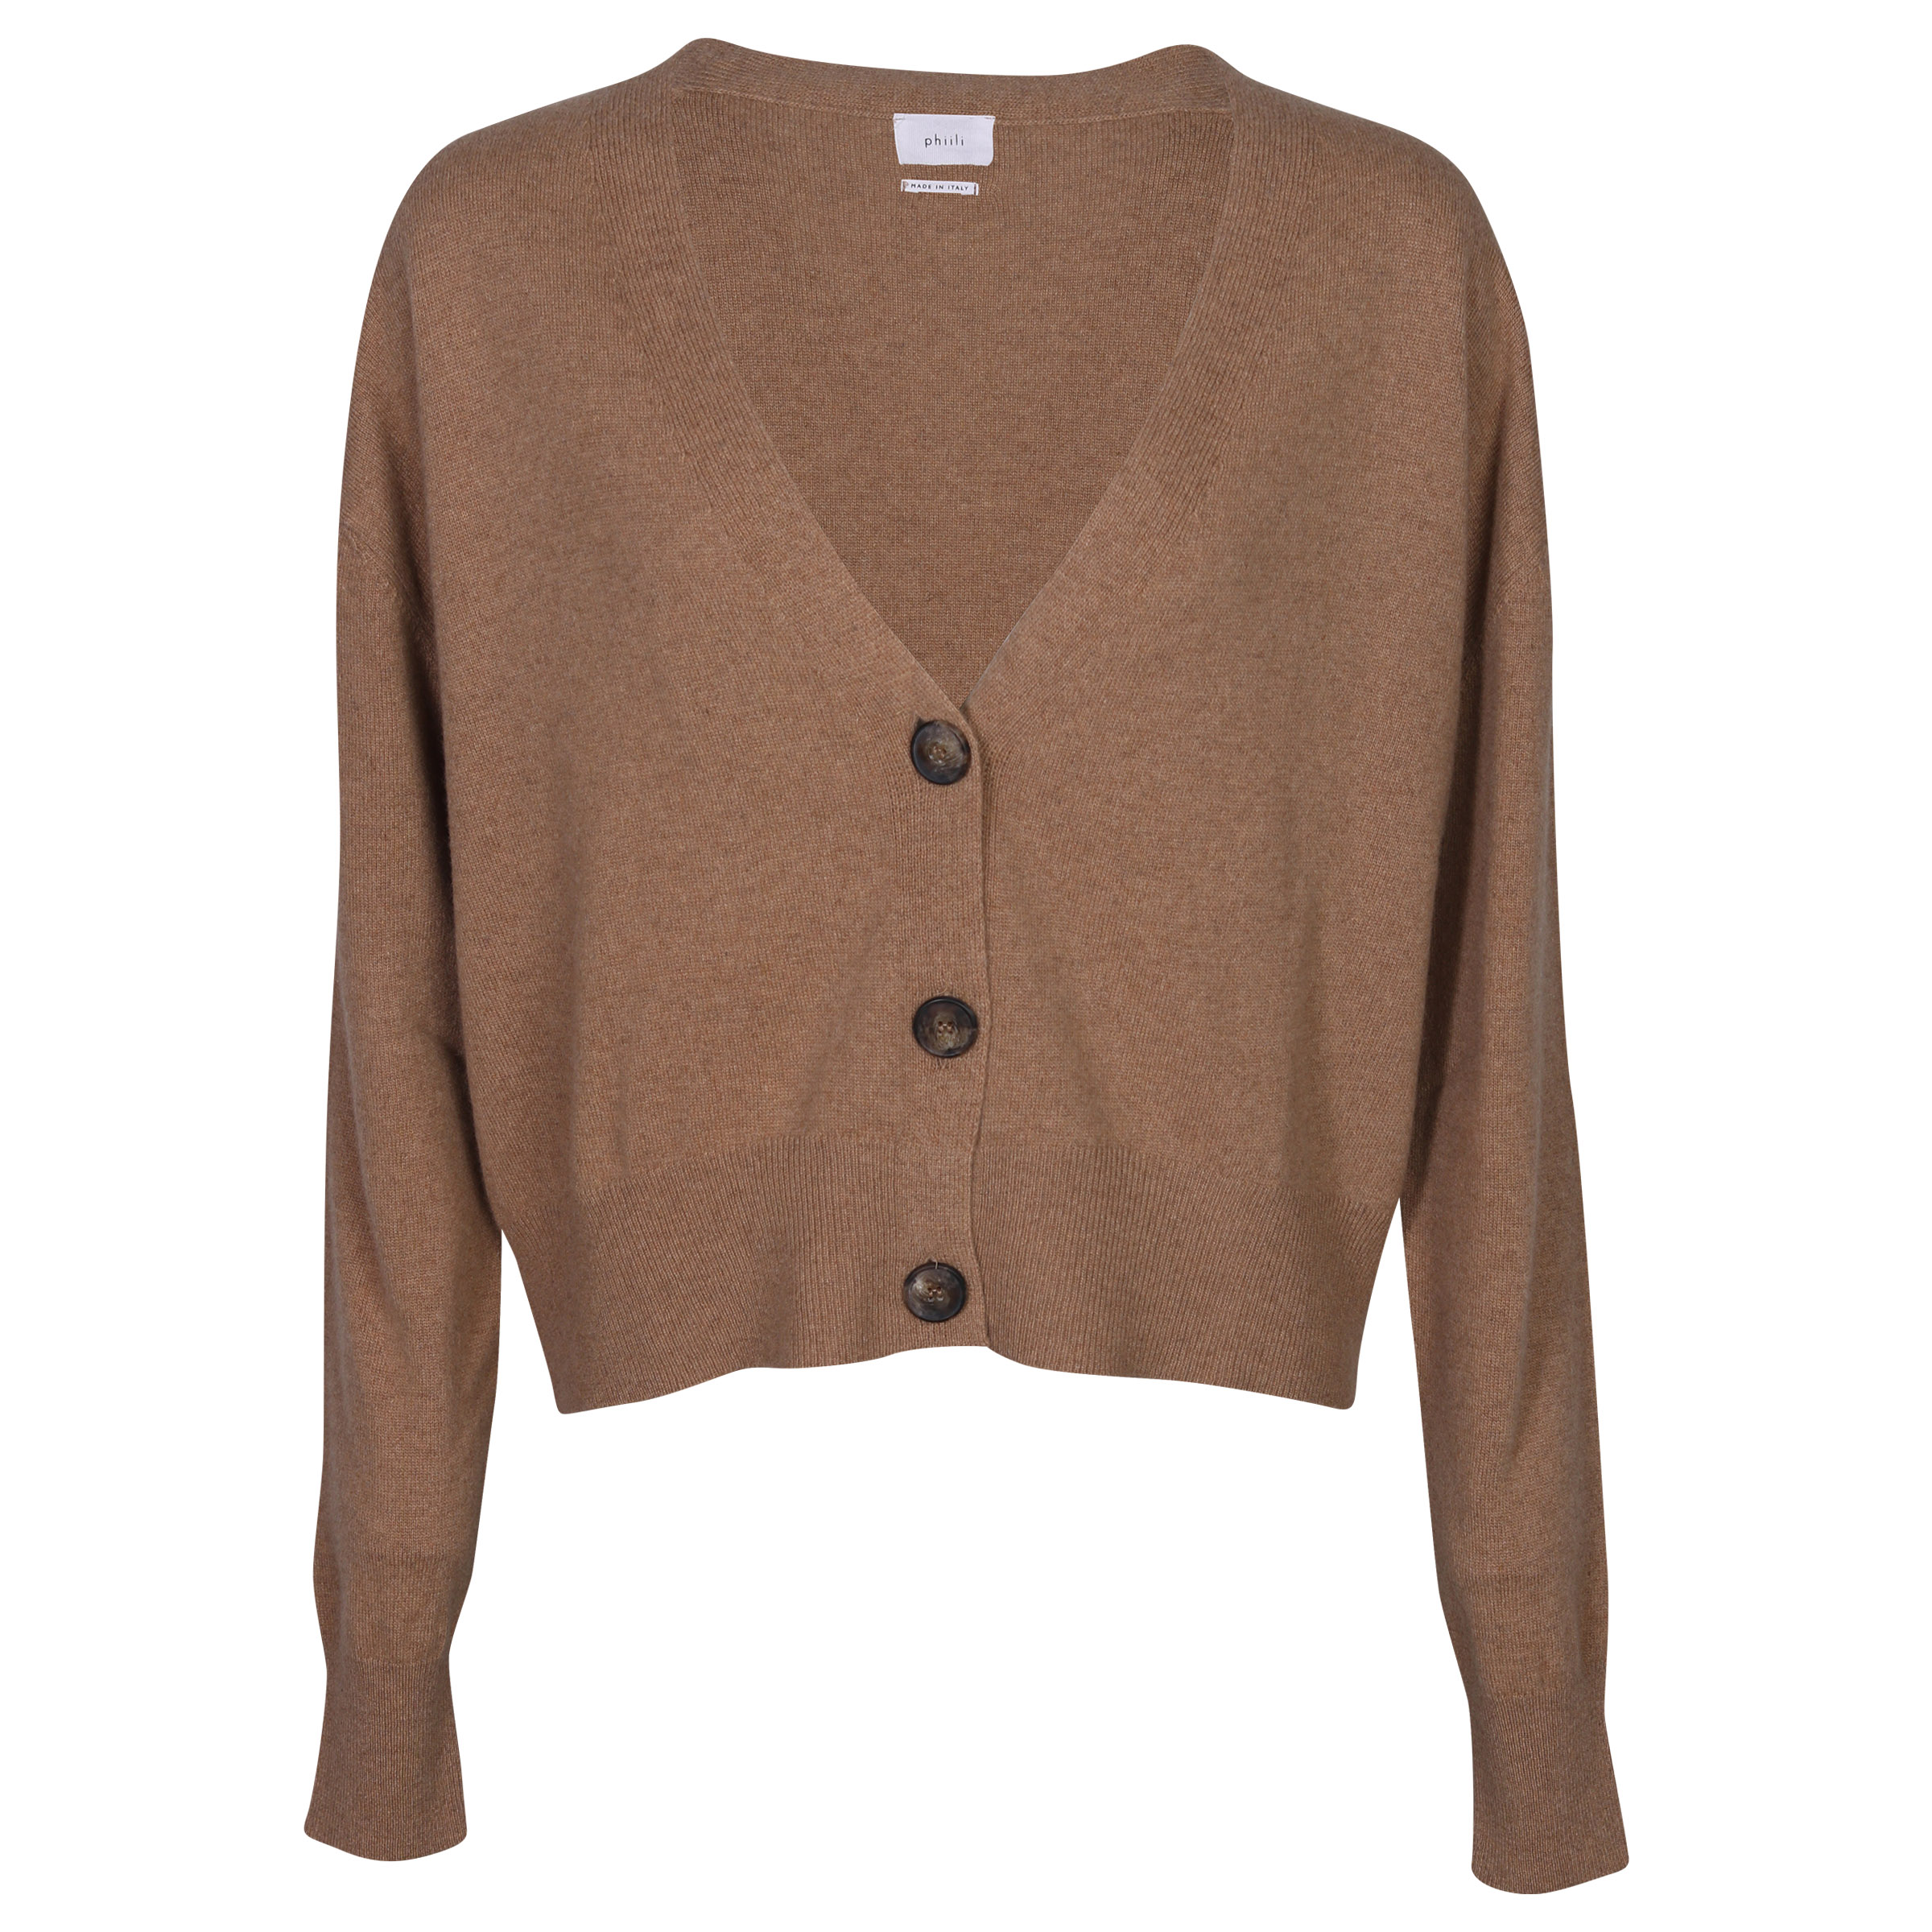 Phiili Recycled Cashmere Cardigan in Camel XS/S